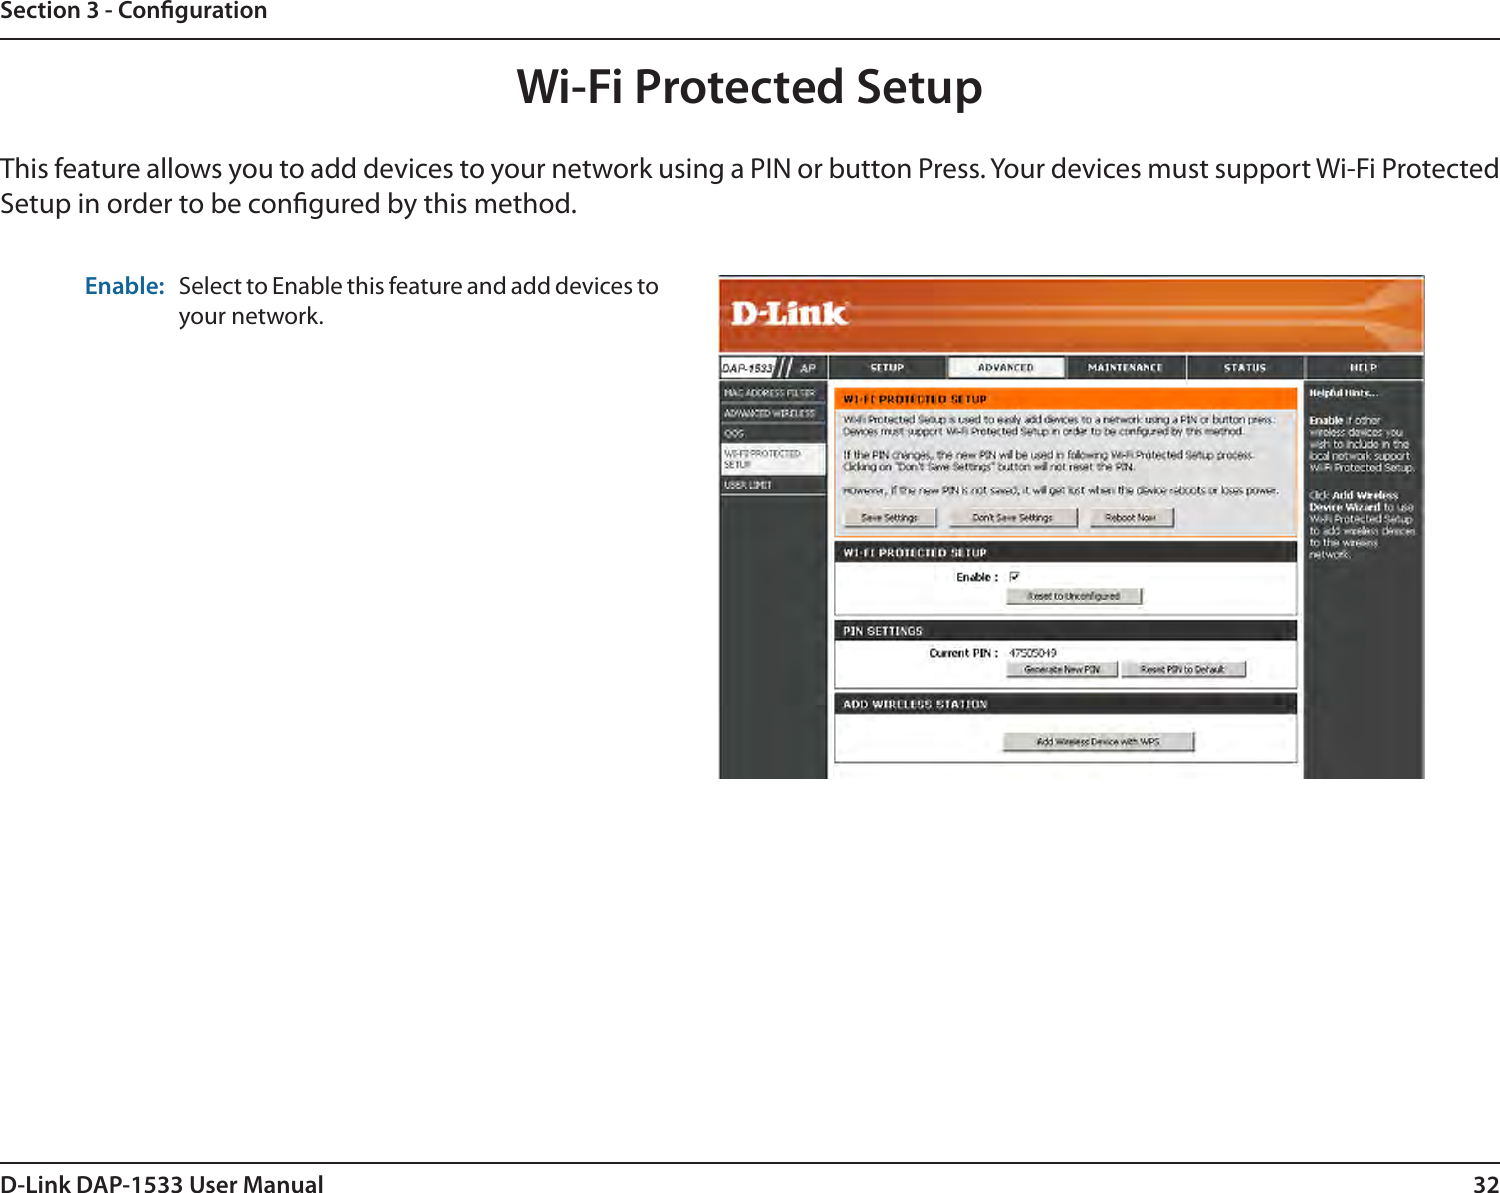 32D-Link DAP-1533 User ManualSection 3 - CongurationWi-Fi Protected SetupEnable: This feature allows you to add devices to your network using a PIN or button Press. Your devices must support Wi-Fi Protected Setup in order to be congured by this method. Select to Enable this feature and add devices to your network.